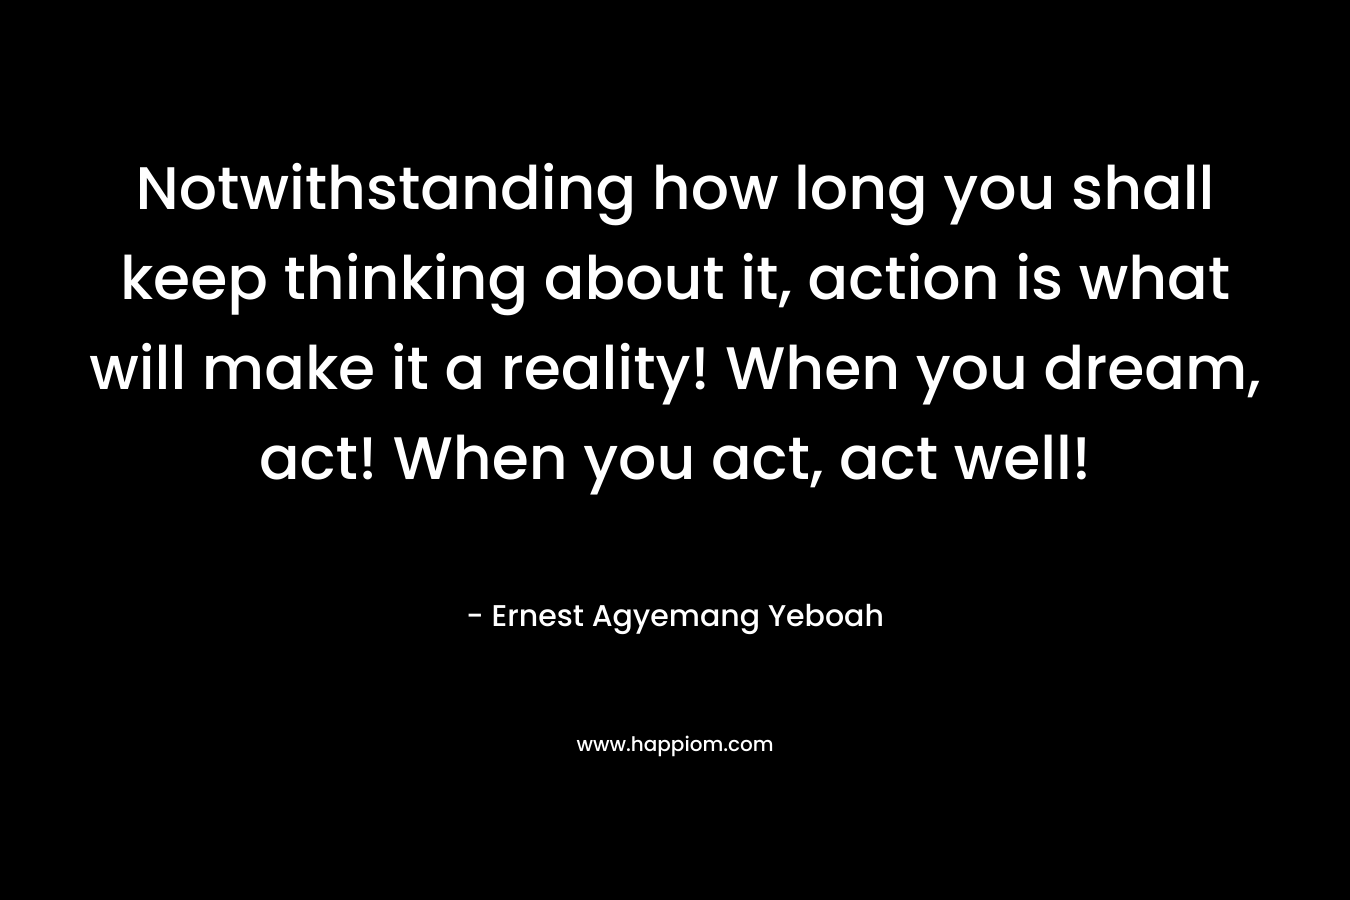 Notwithstanding how long you shall keep thinking about it, action is what will make it a reality! When you dream, act! When you act, act well!